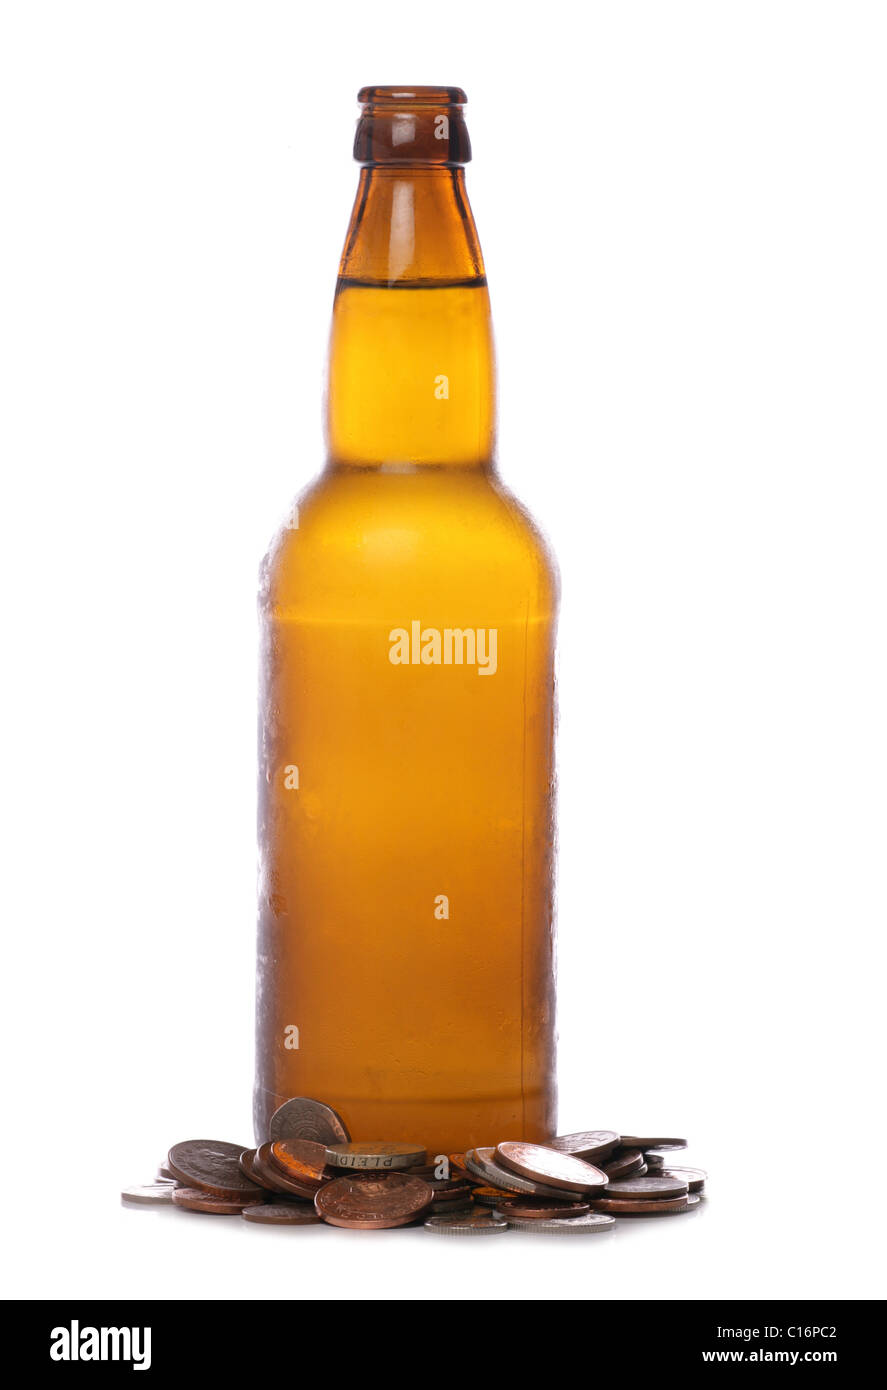 Beer bottle with sterling money studio cutout Stock Photo